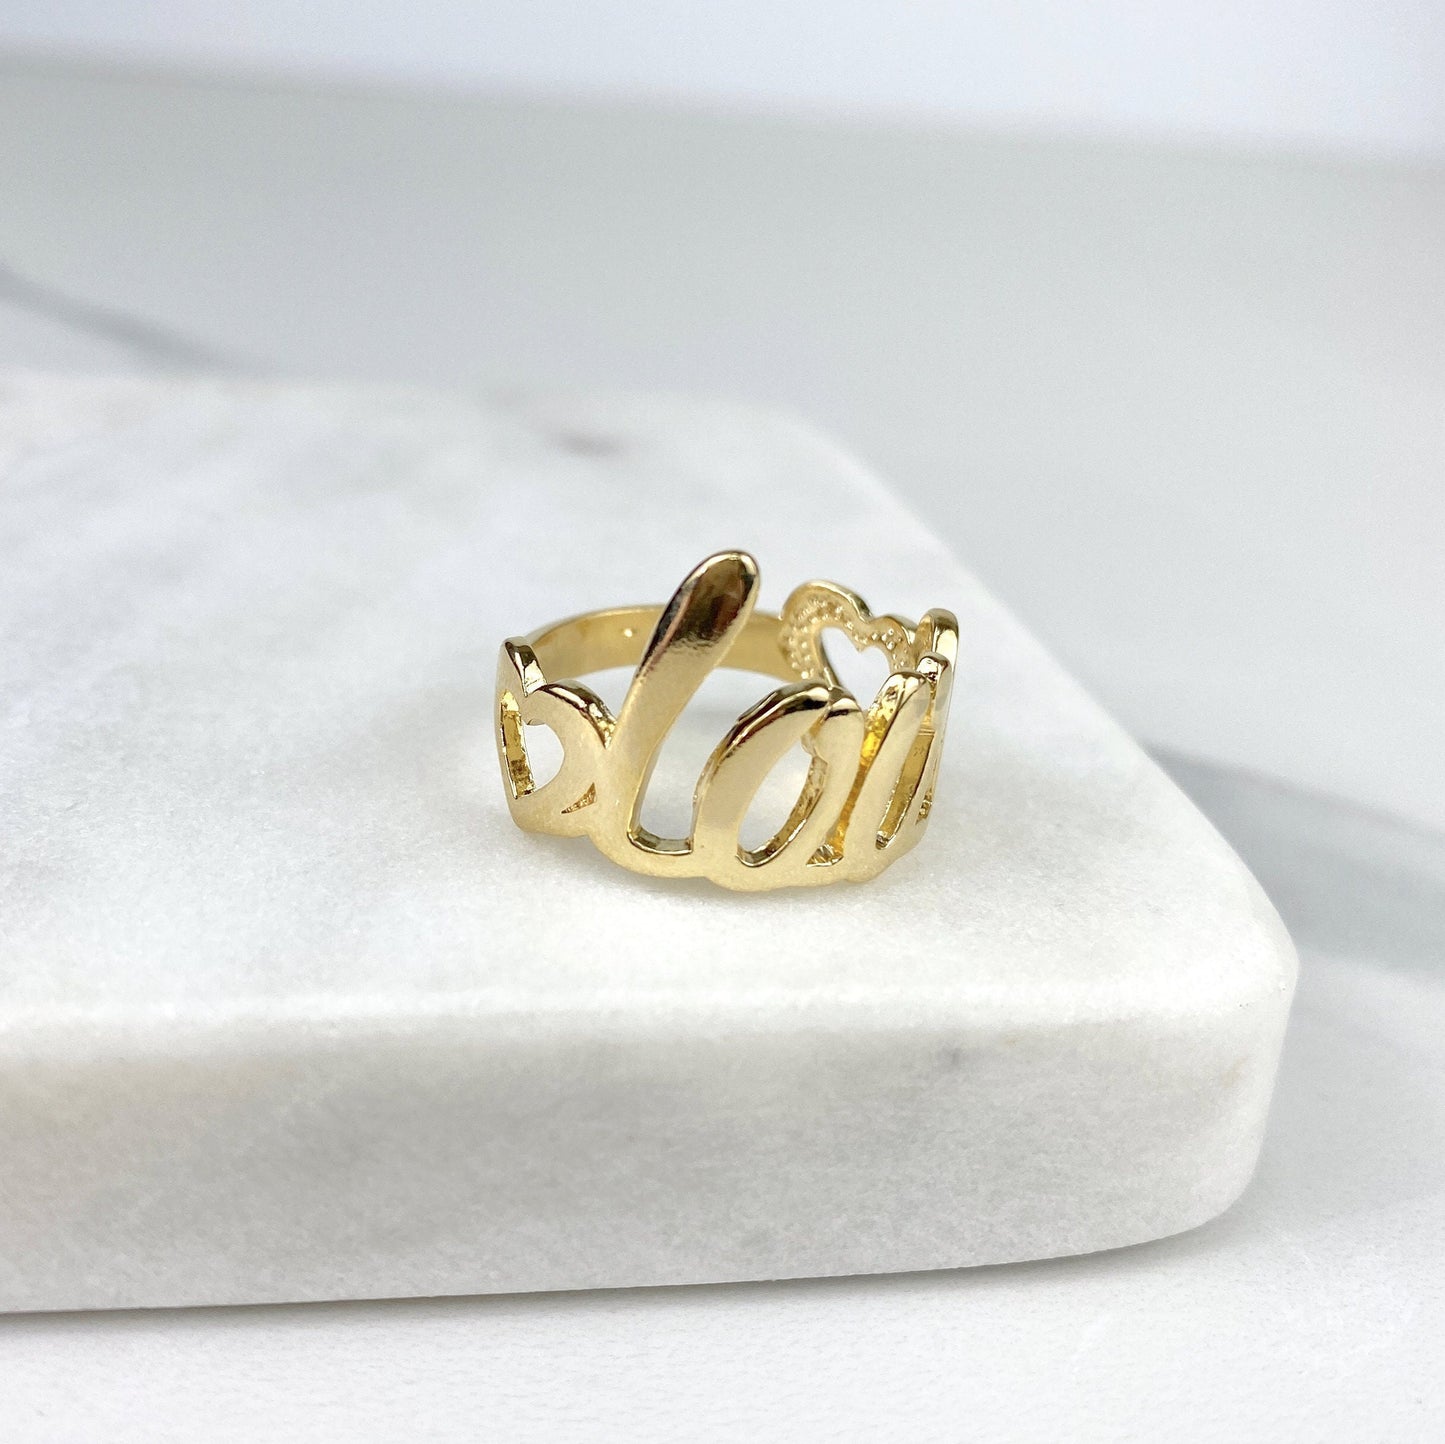 18k Gold Filled Love Ring, Letters Words, Gold or Silver, Wholesale Jewelry Making Supplies